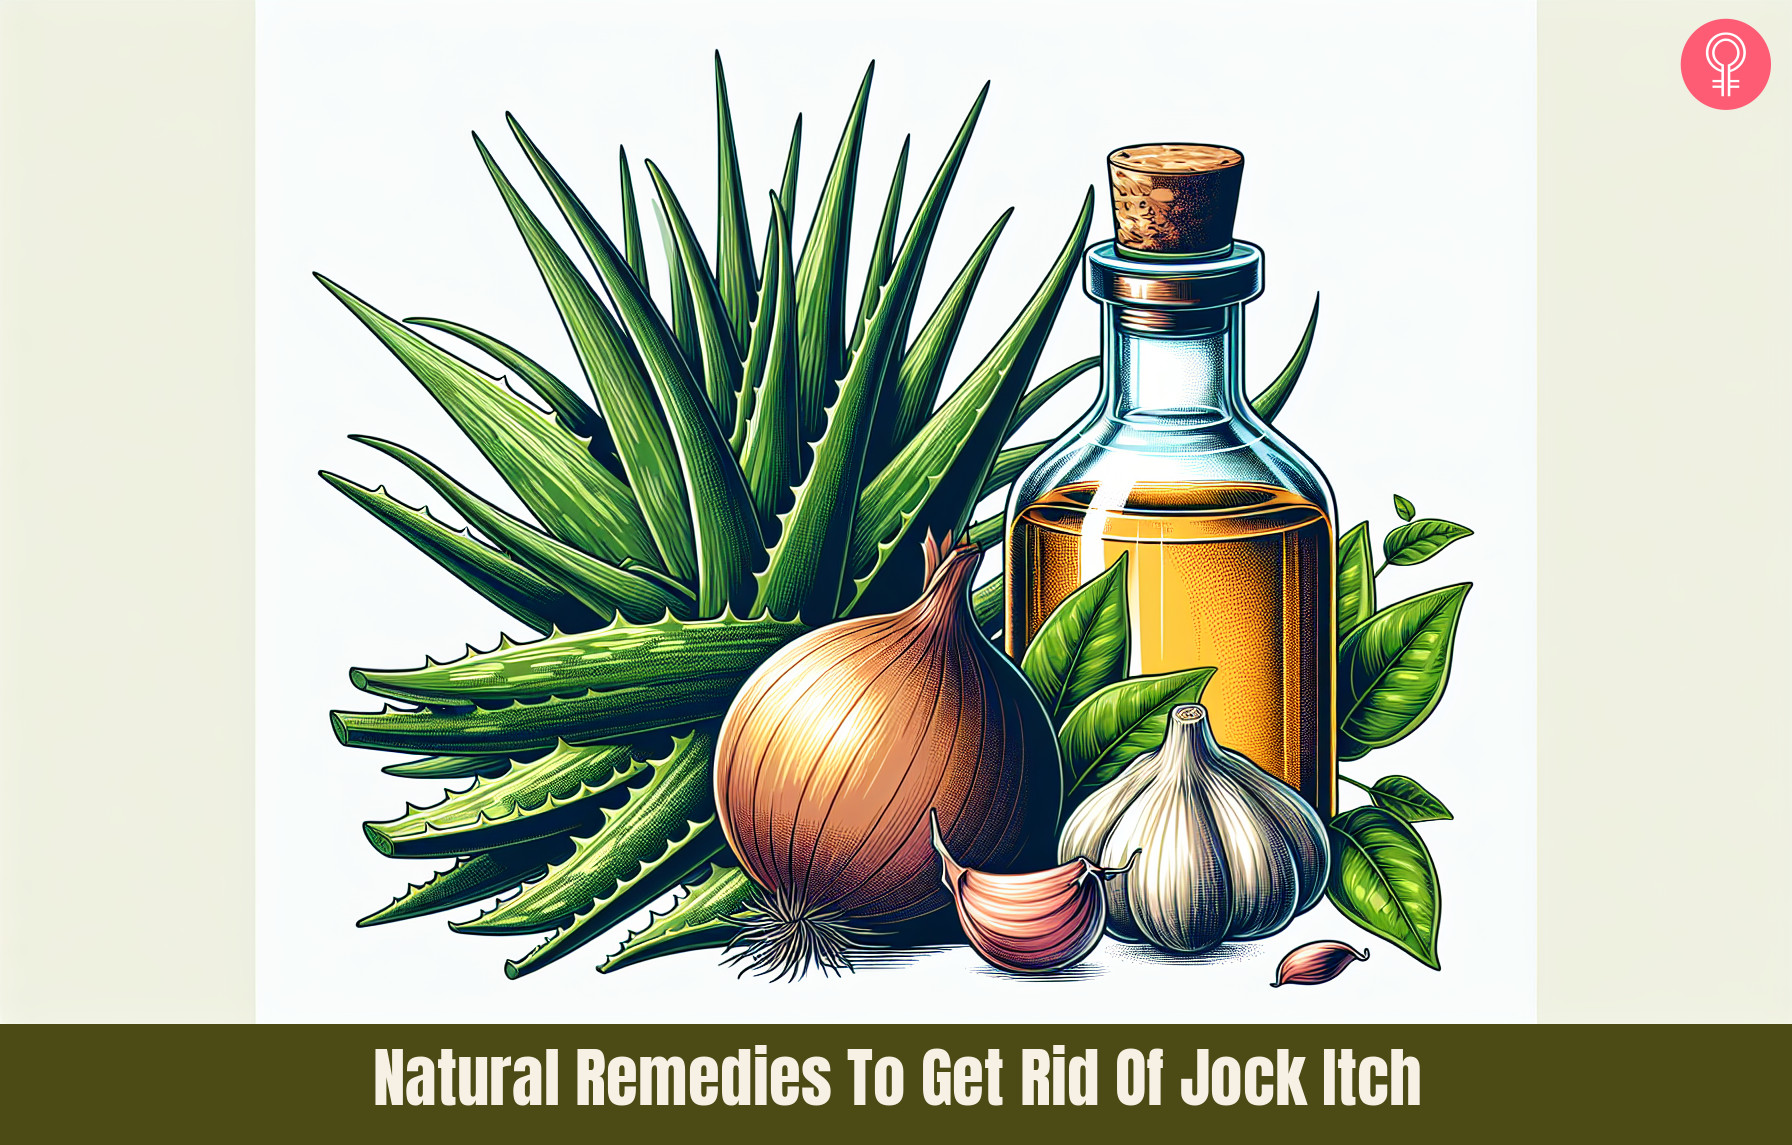 Natural remedies for jock itch